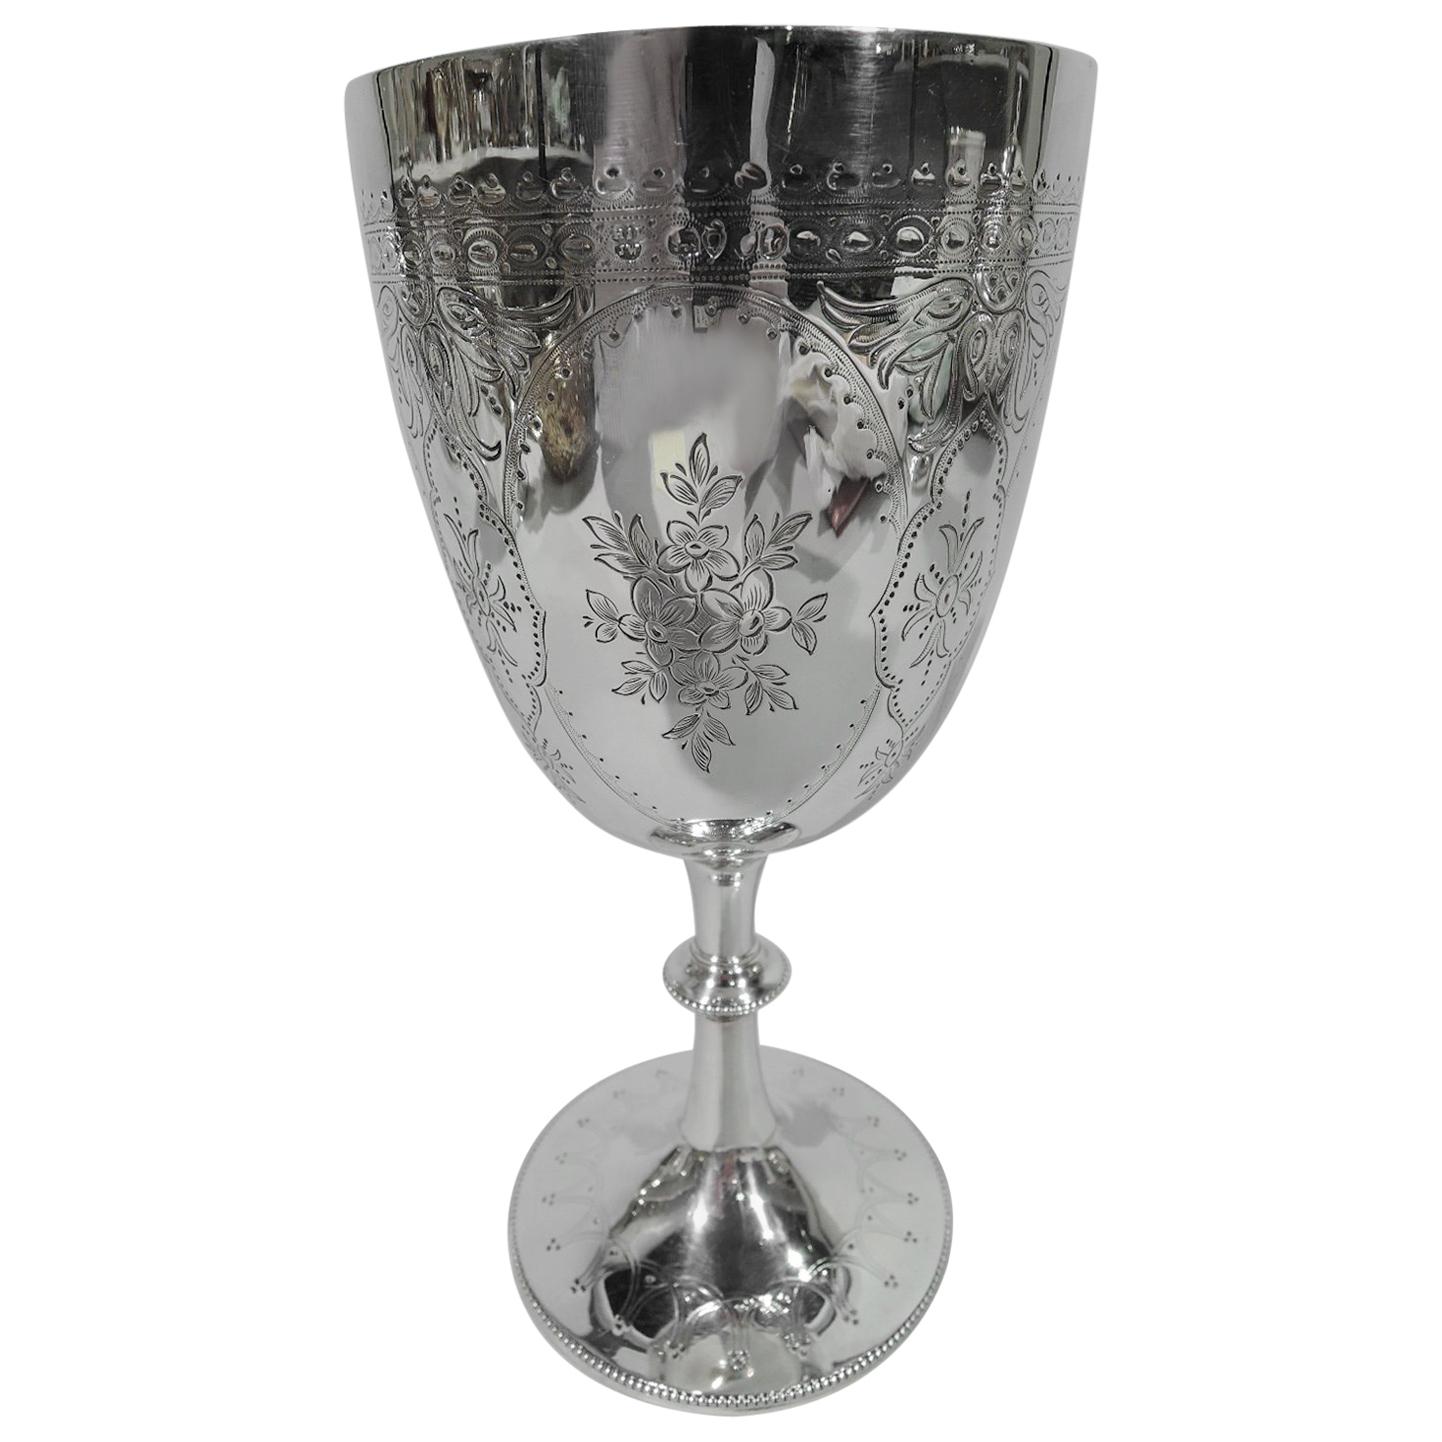 Antique English Sterling Silver Goblet with Pretty Flowers